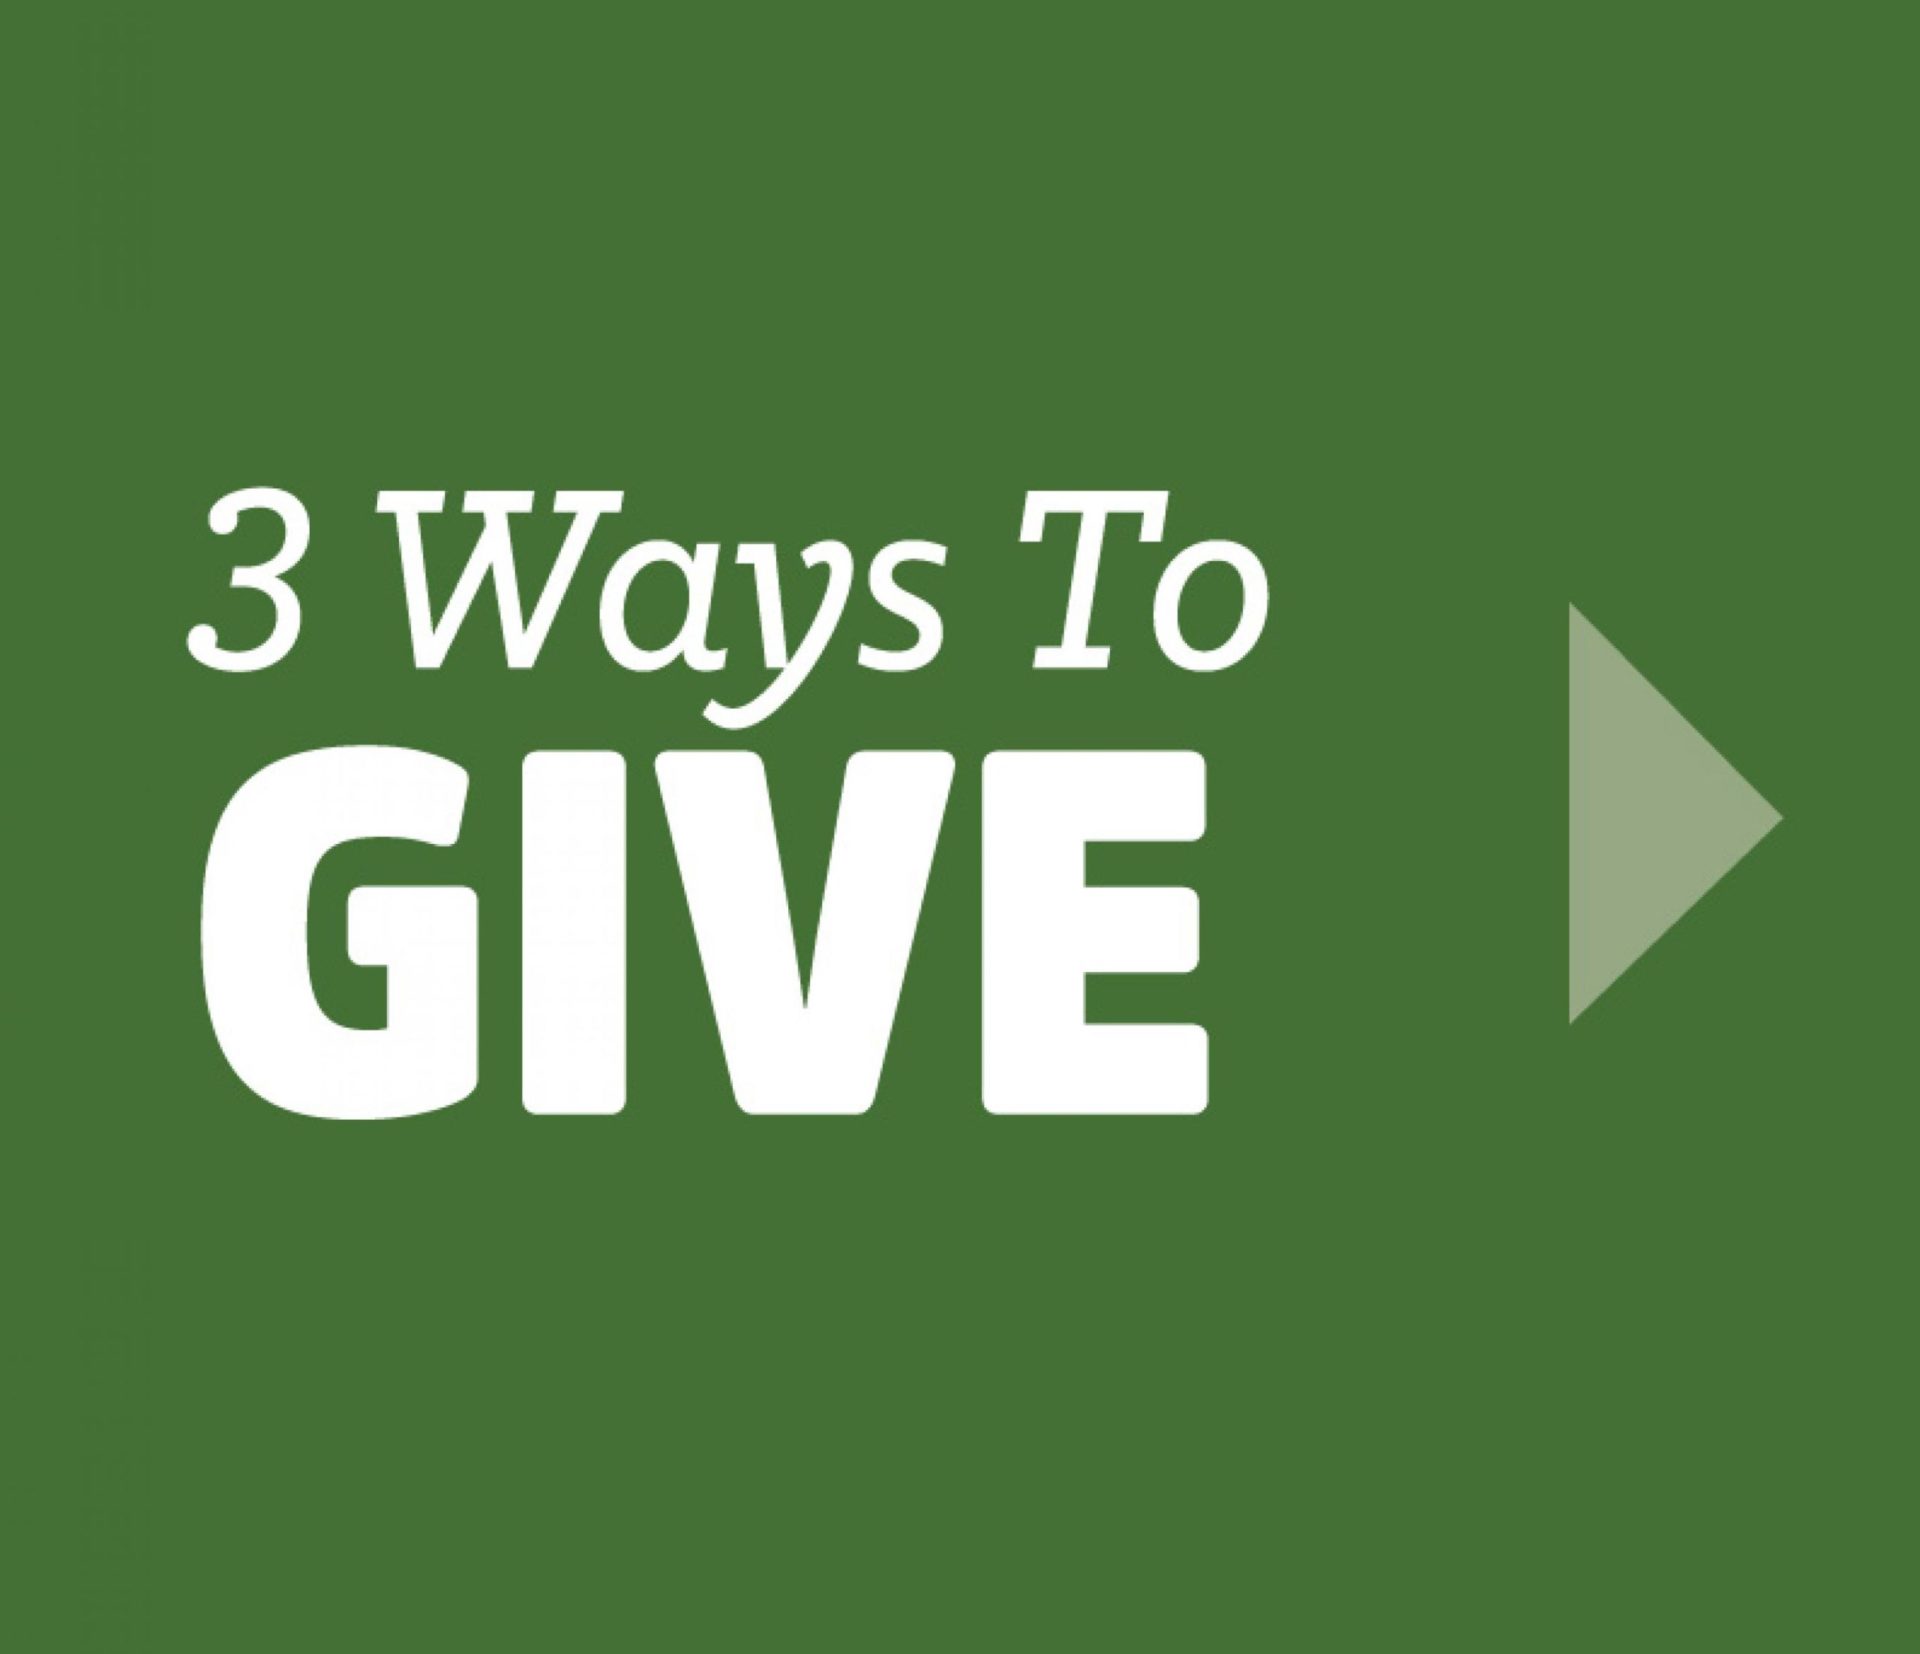 3 Ways To GIVE